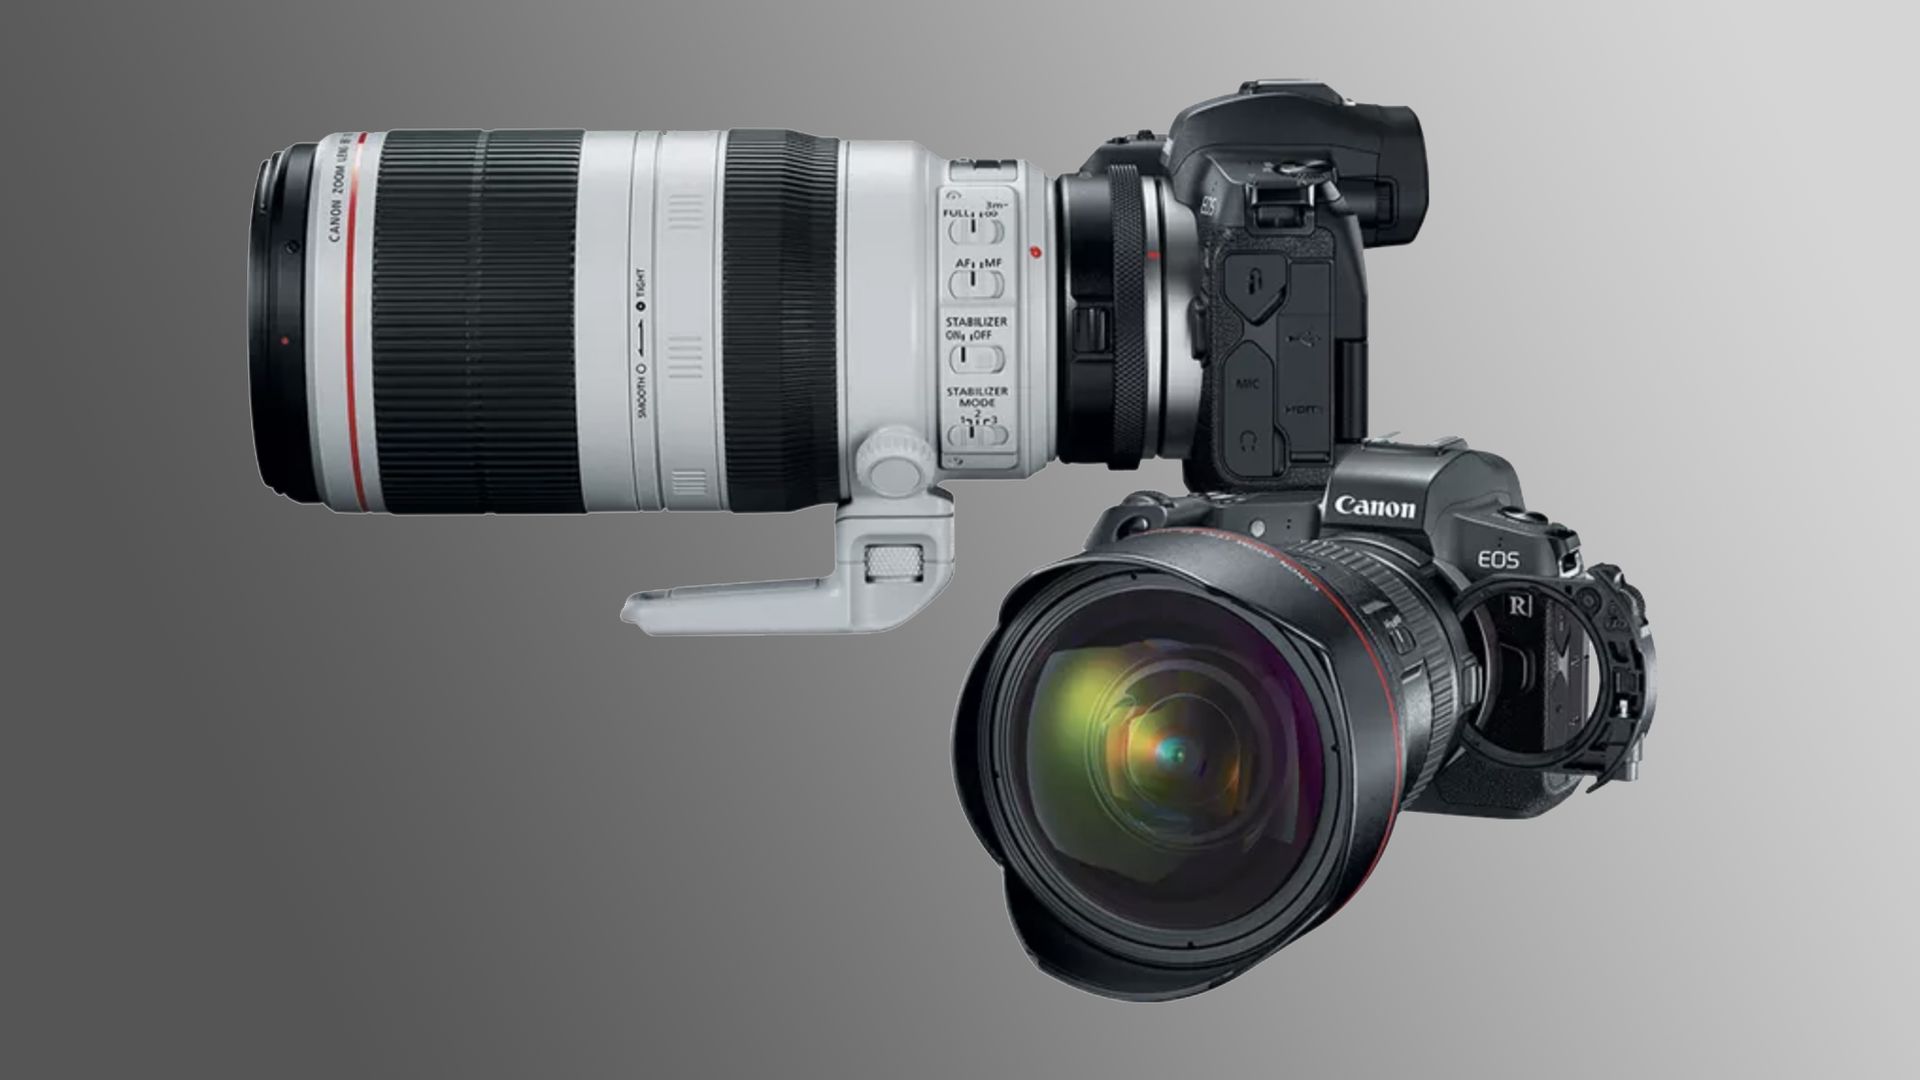 Save An Enormous 400 With Canon s Latest Rebates Digital Camera World